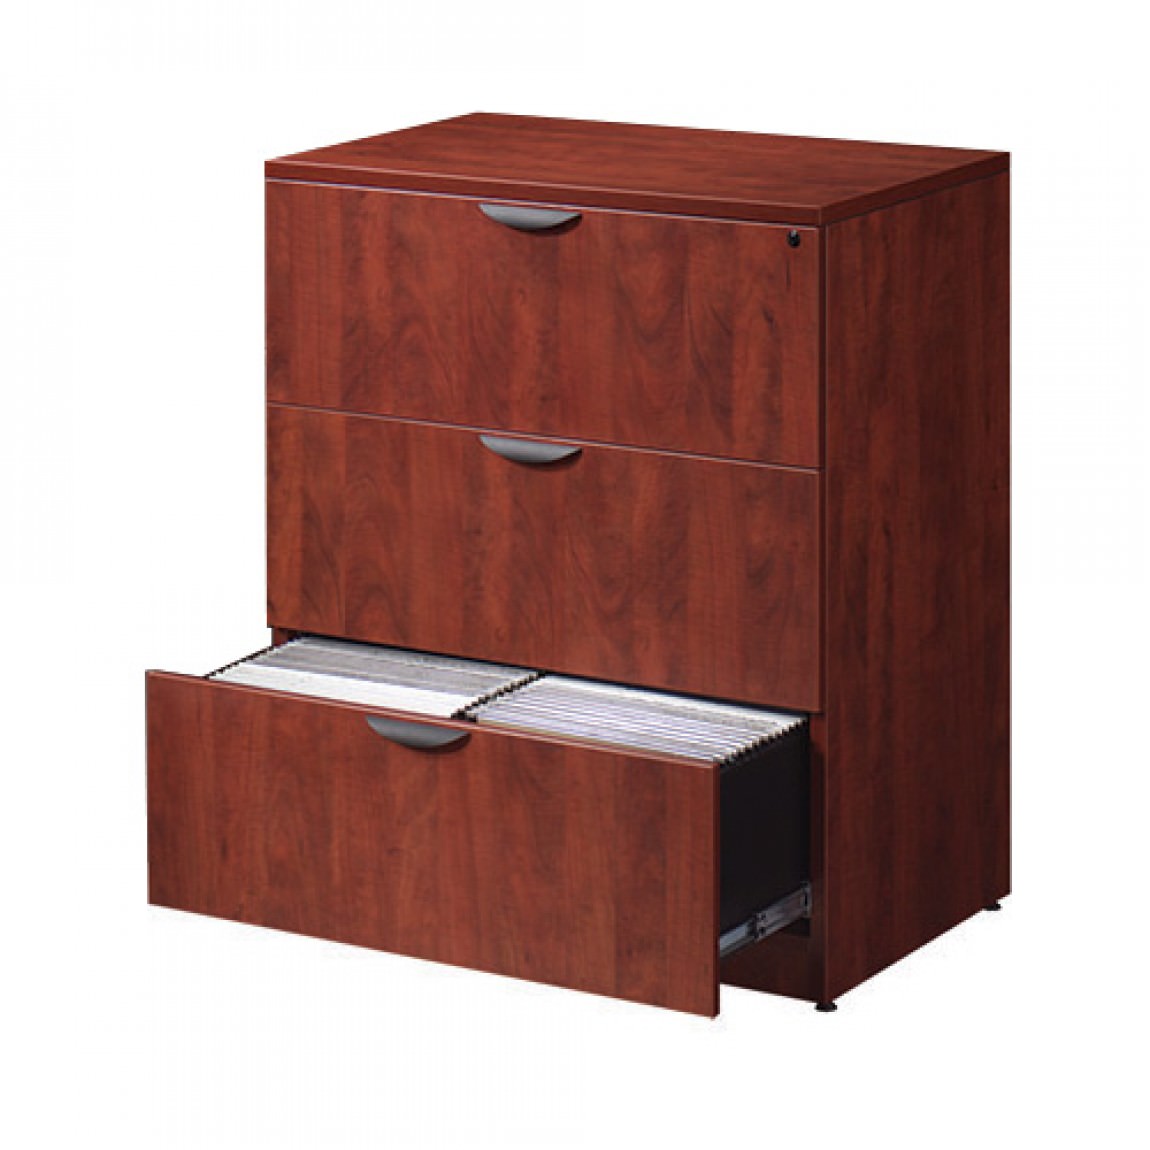 3 Drawer Lateral Filing Cabinet by Harmony | Madison Liquidators